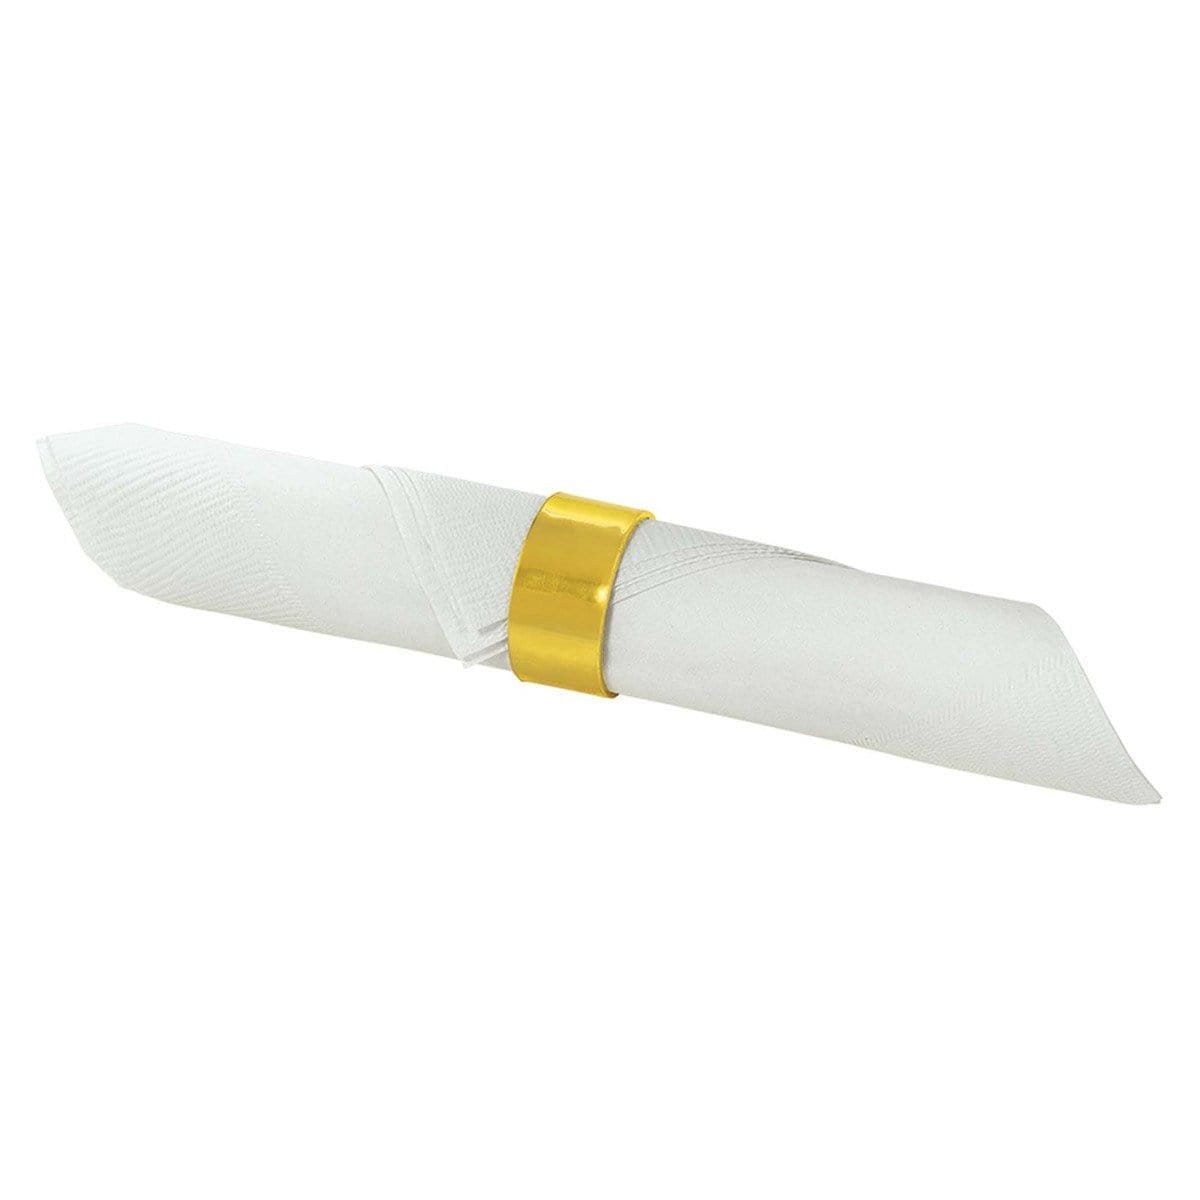 Buy Plasticware Napkin Rings - Gold 8/pkg. sold at Party Expert